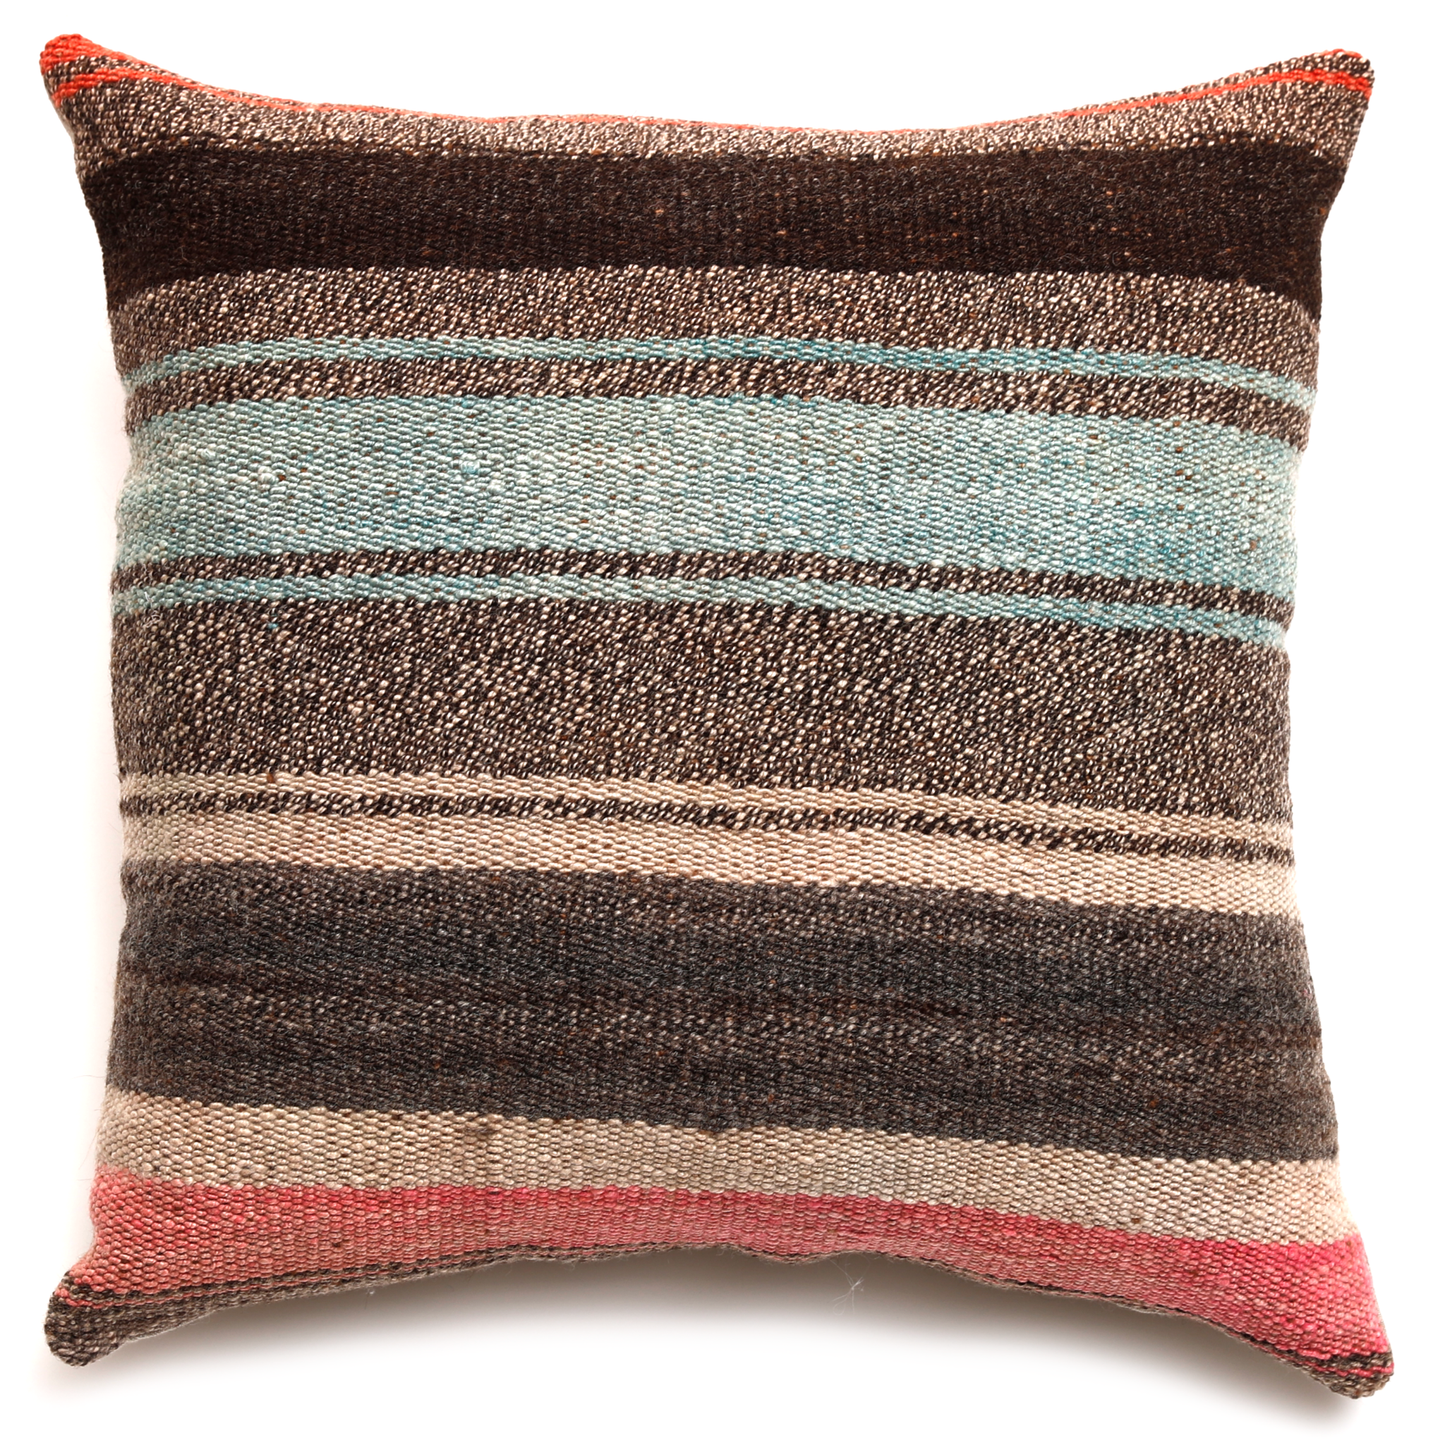 Intiearth vintage woven frazada decorative pillow 20" square colorful wool designs